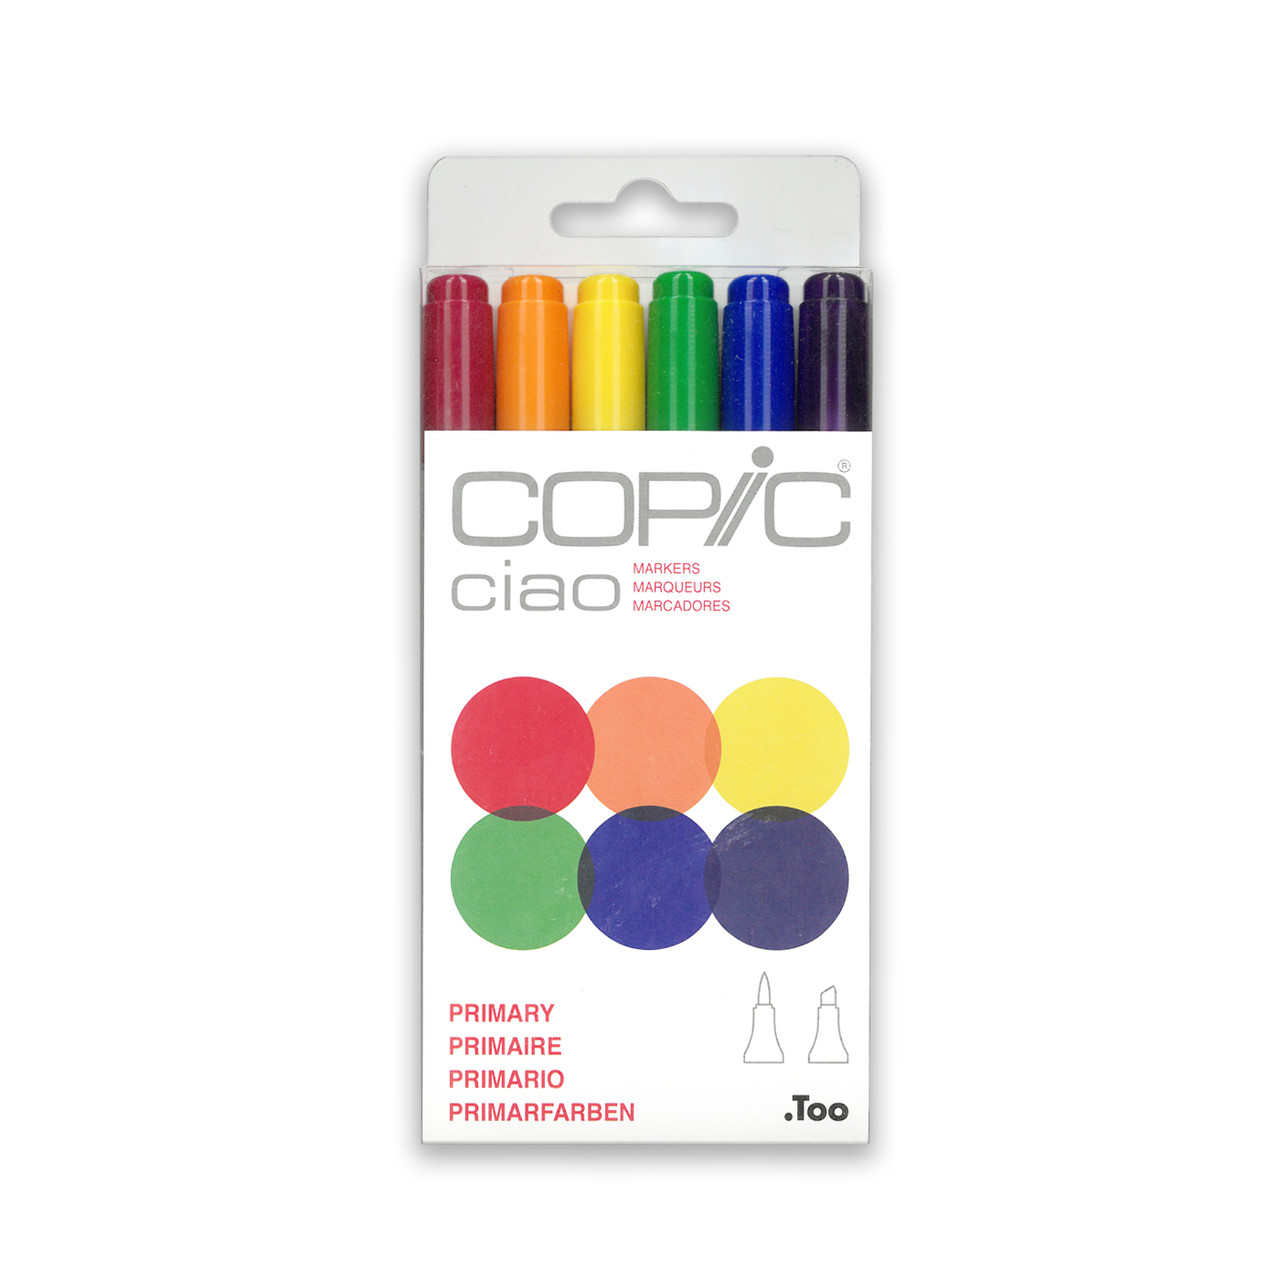 Copic Ciao Twin Tip Skin Tone Markers 6 Pack